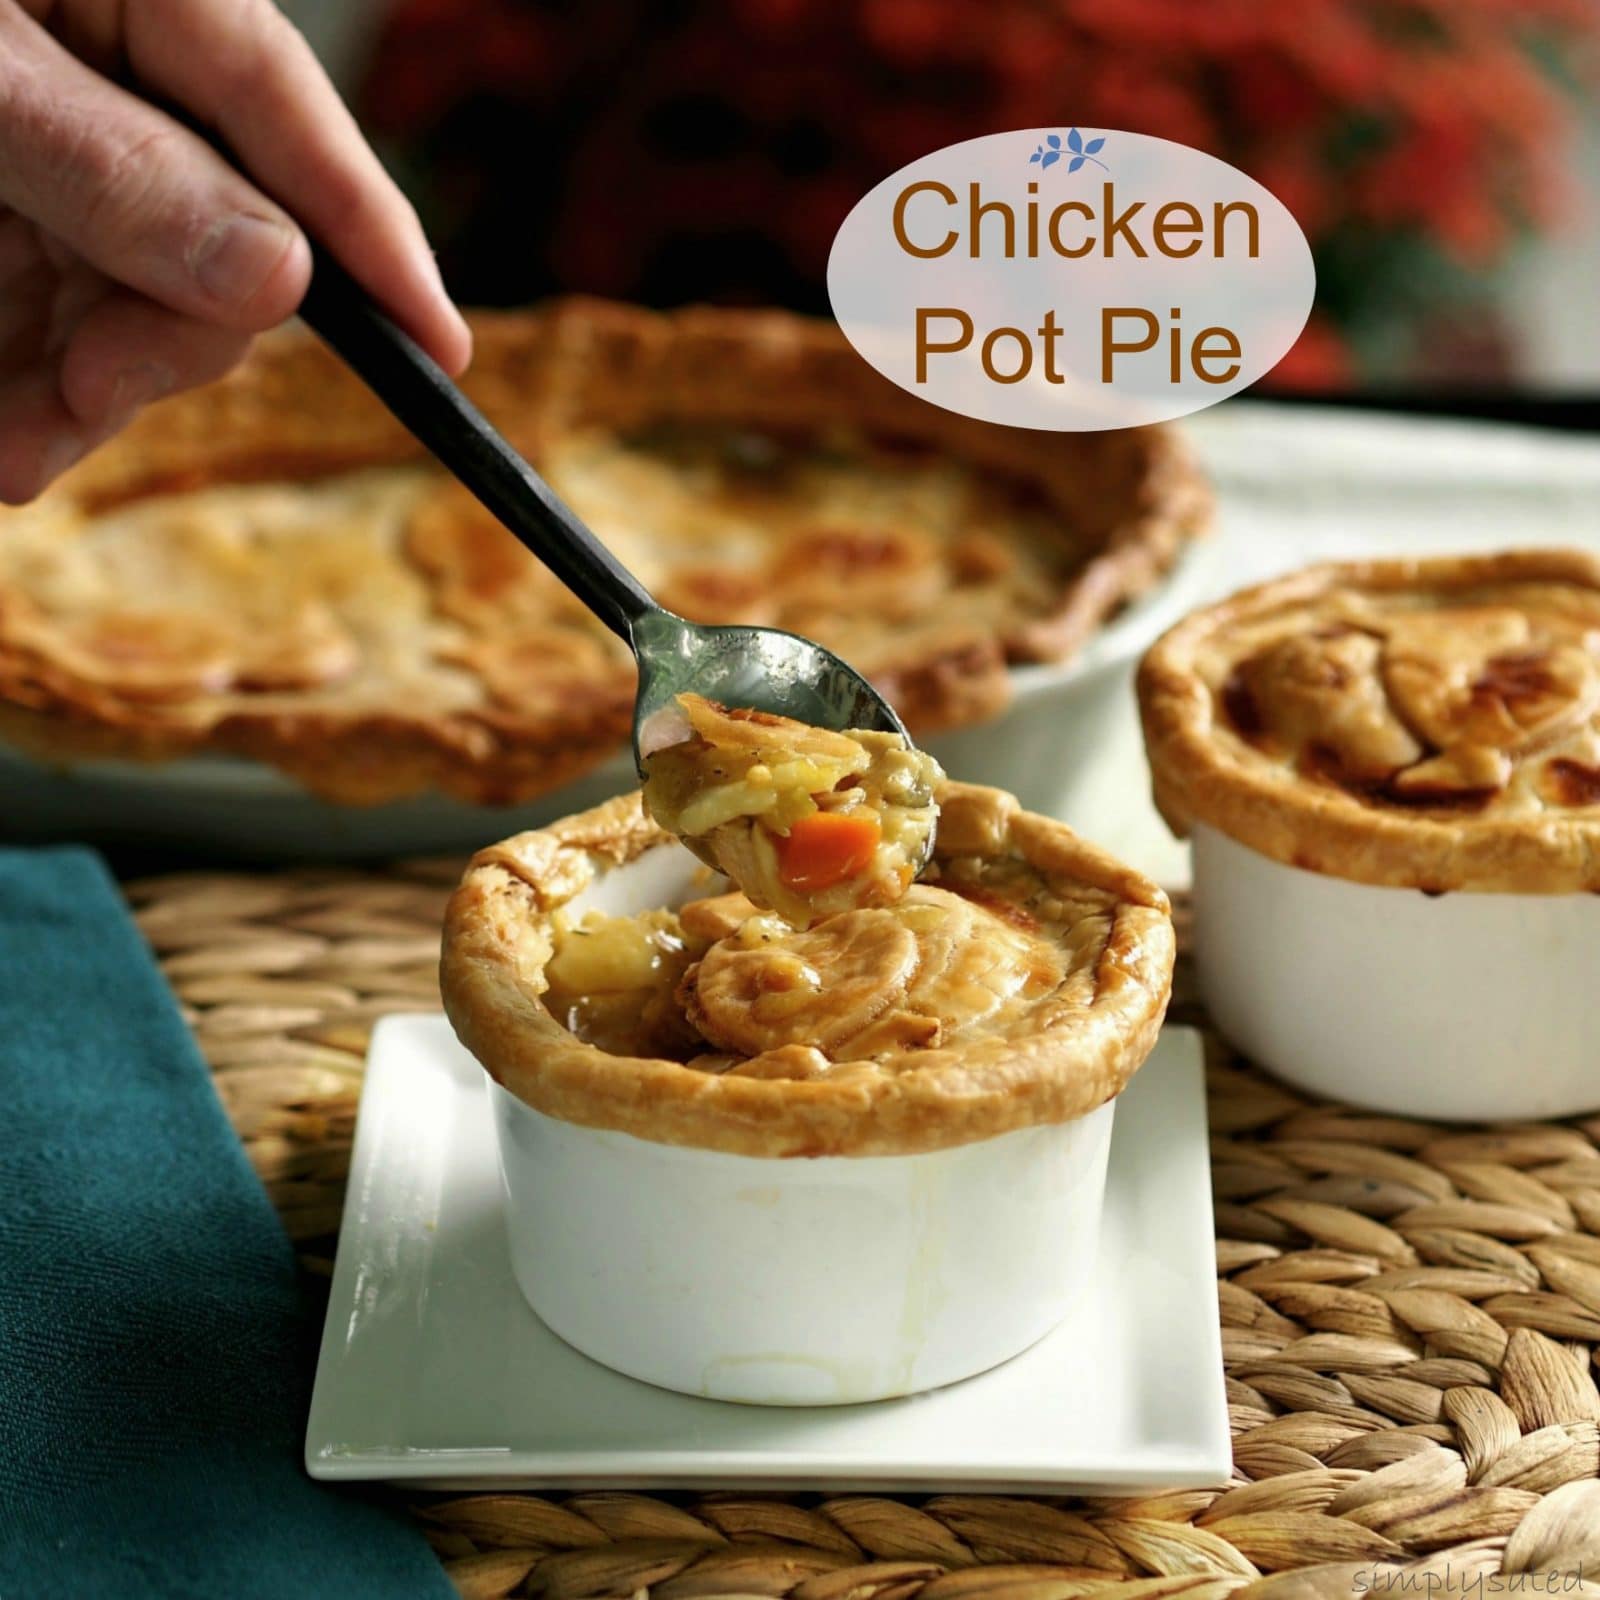 Chicken Pot Pie is the epitome of comfort food and this recipe has it all.